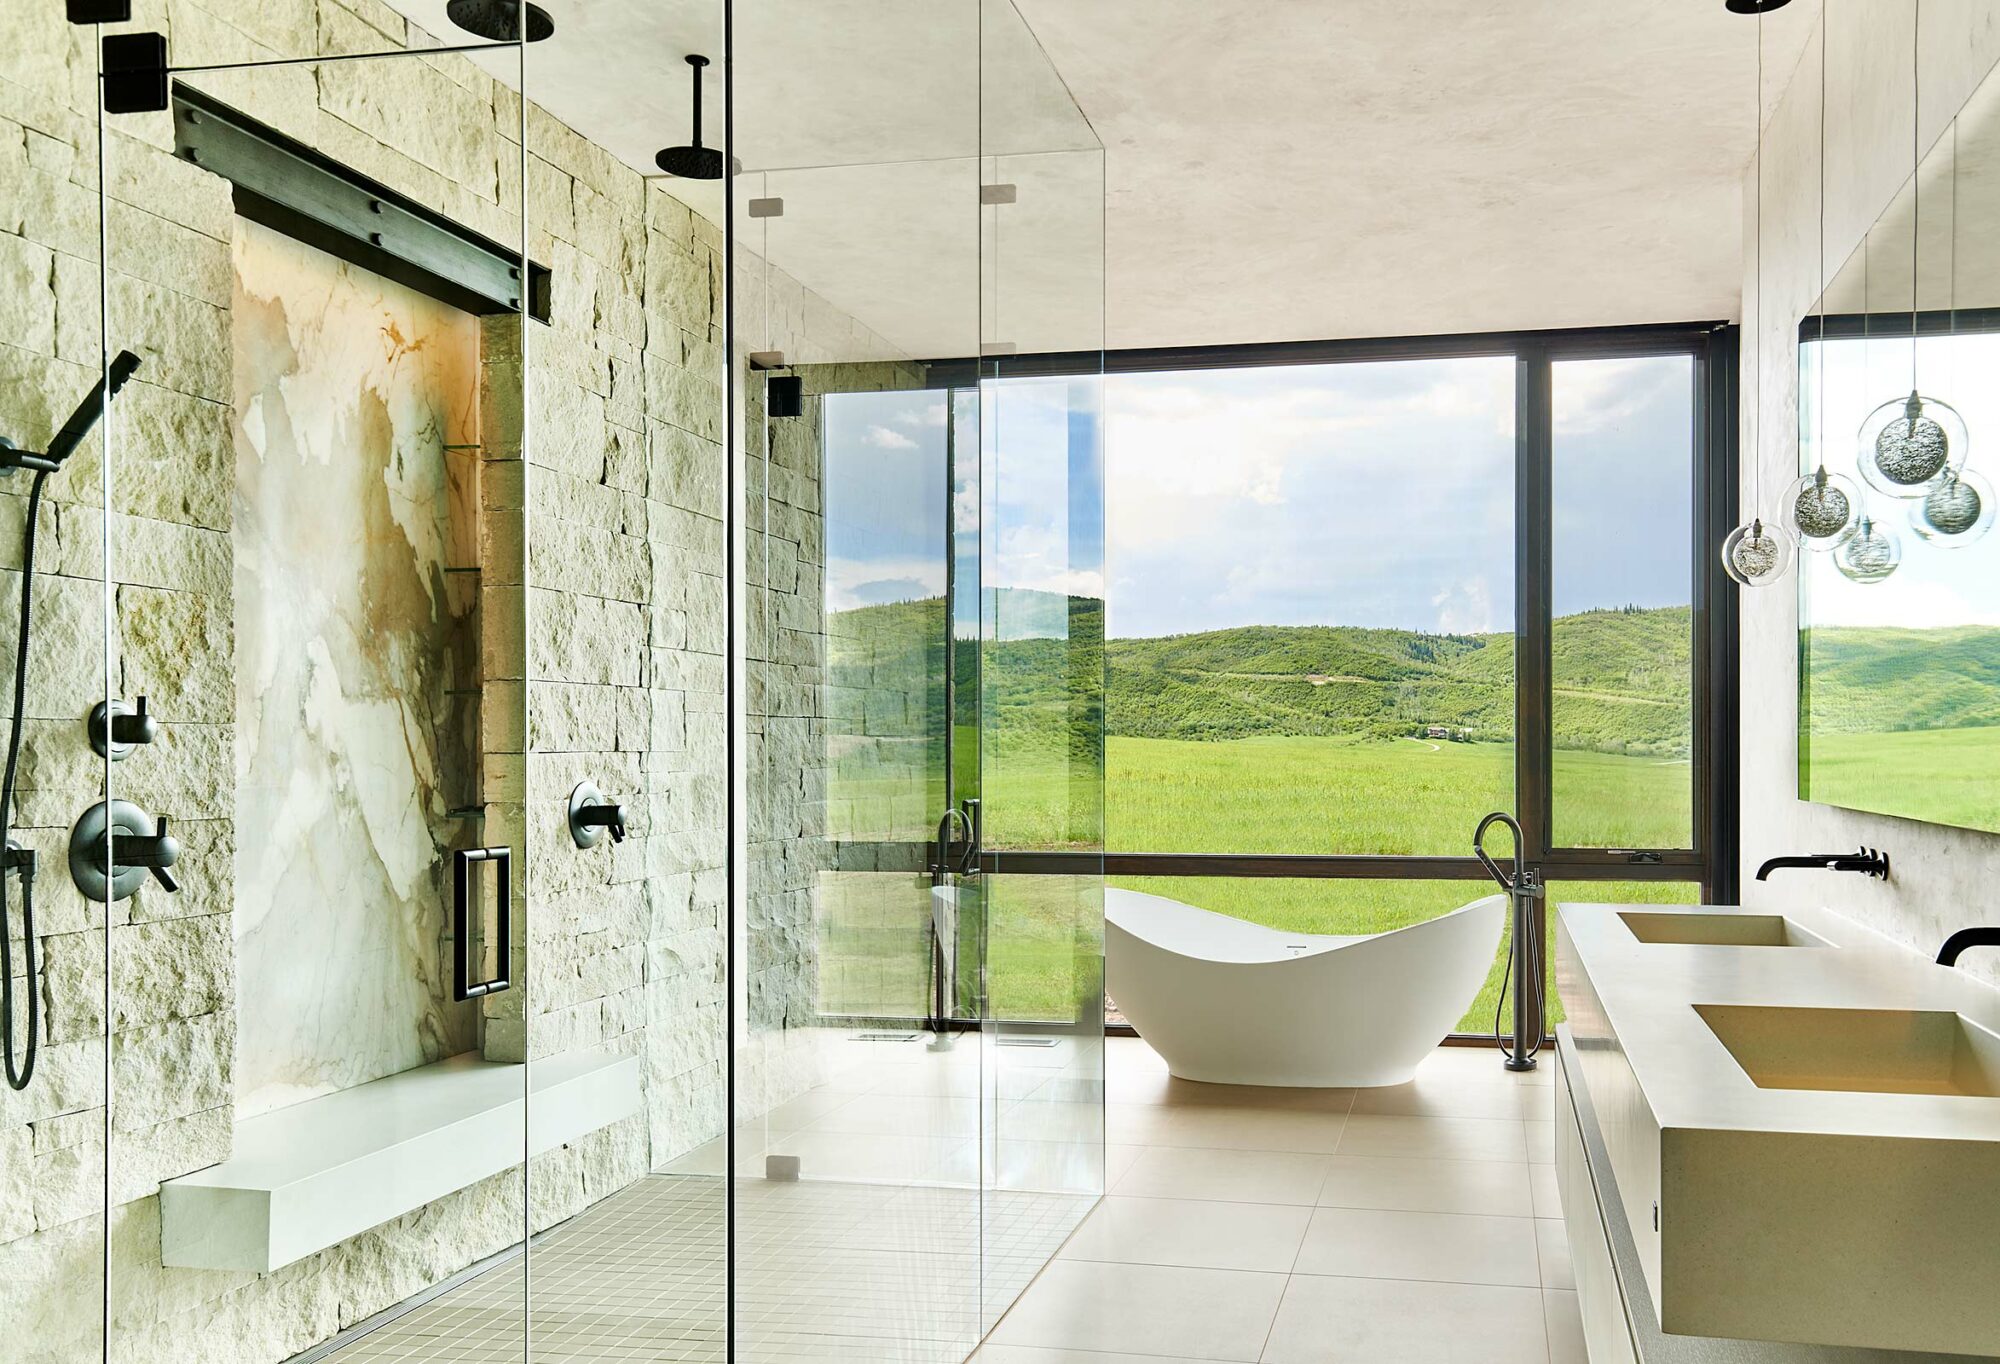 a freestanding tub in front of floor to ceilingTranquil, peaceful bathroom spaces remain a top ask from clients. Soft tones and natural materials help accomplish the look. windows in natural stone bathroom